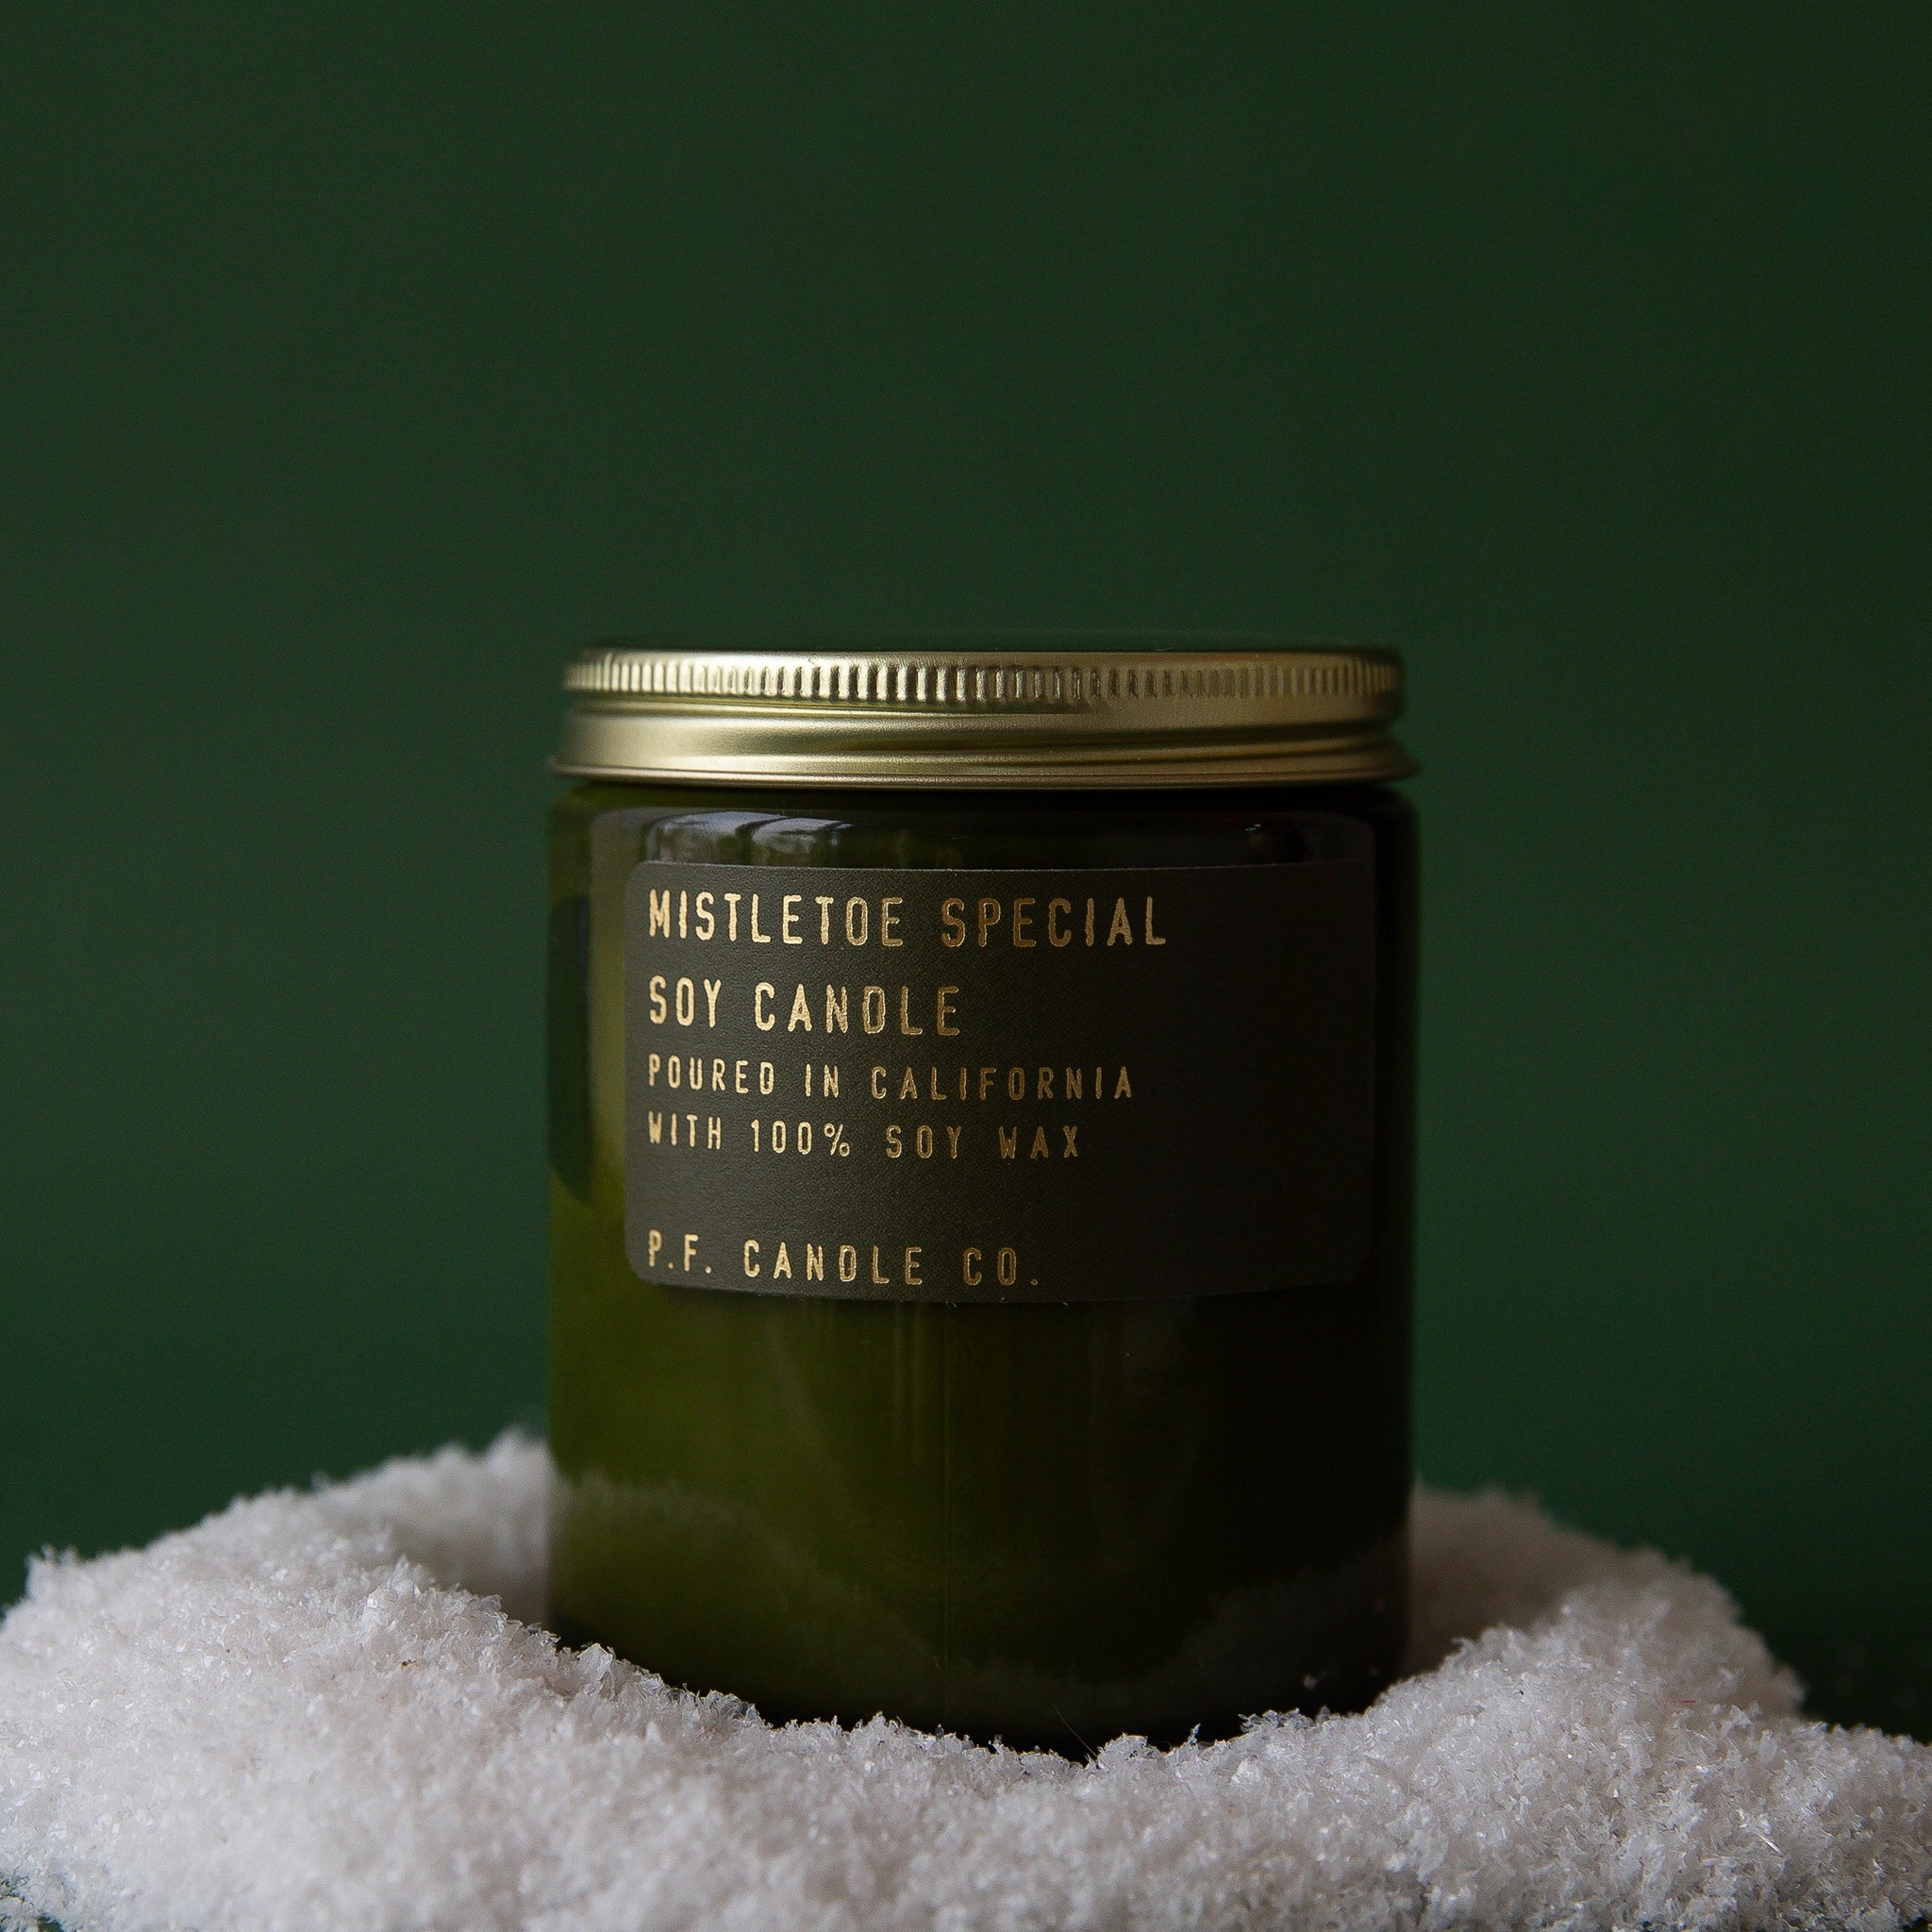 On a dark green background is a green glass jarred candle with a gold lid and gold lettering that reads, "Mistletoe Special Soy Candle".